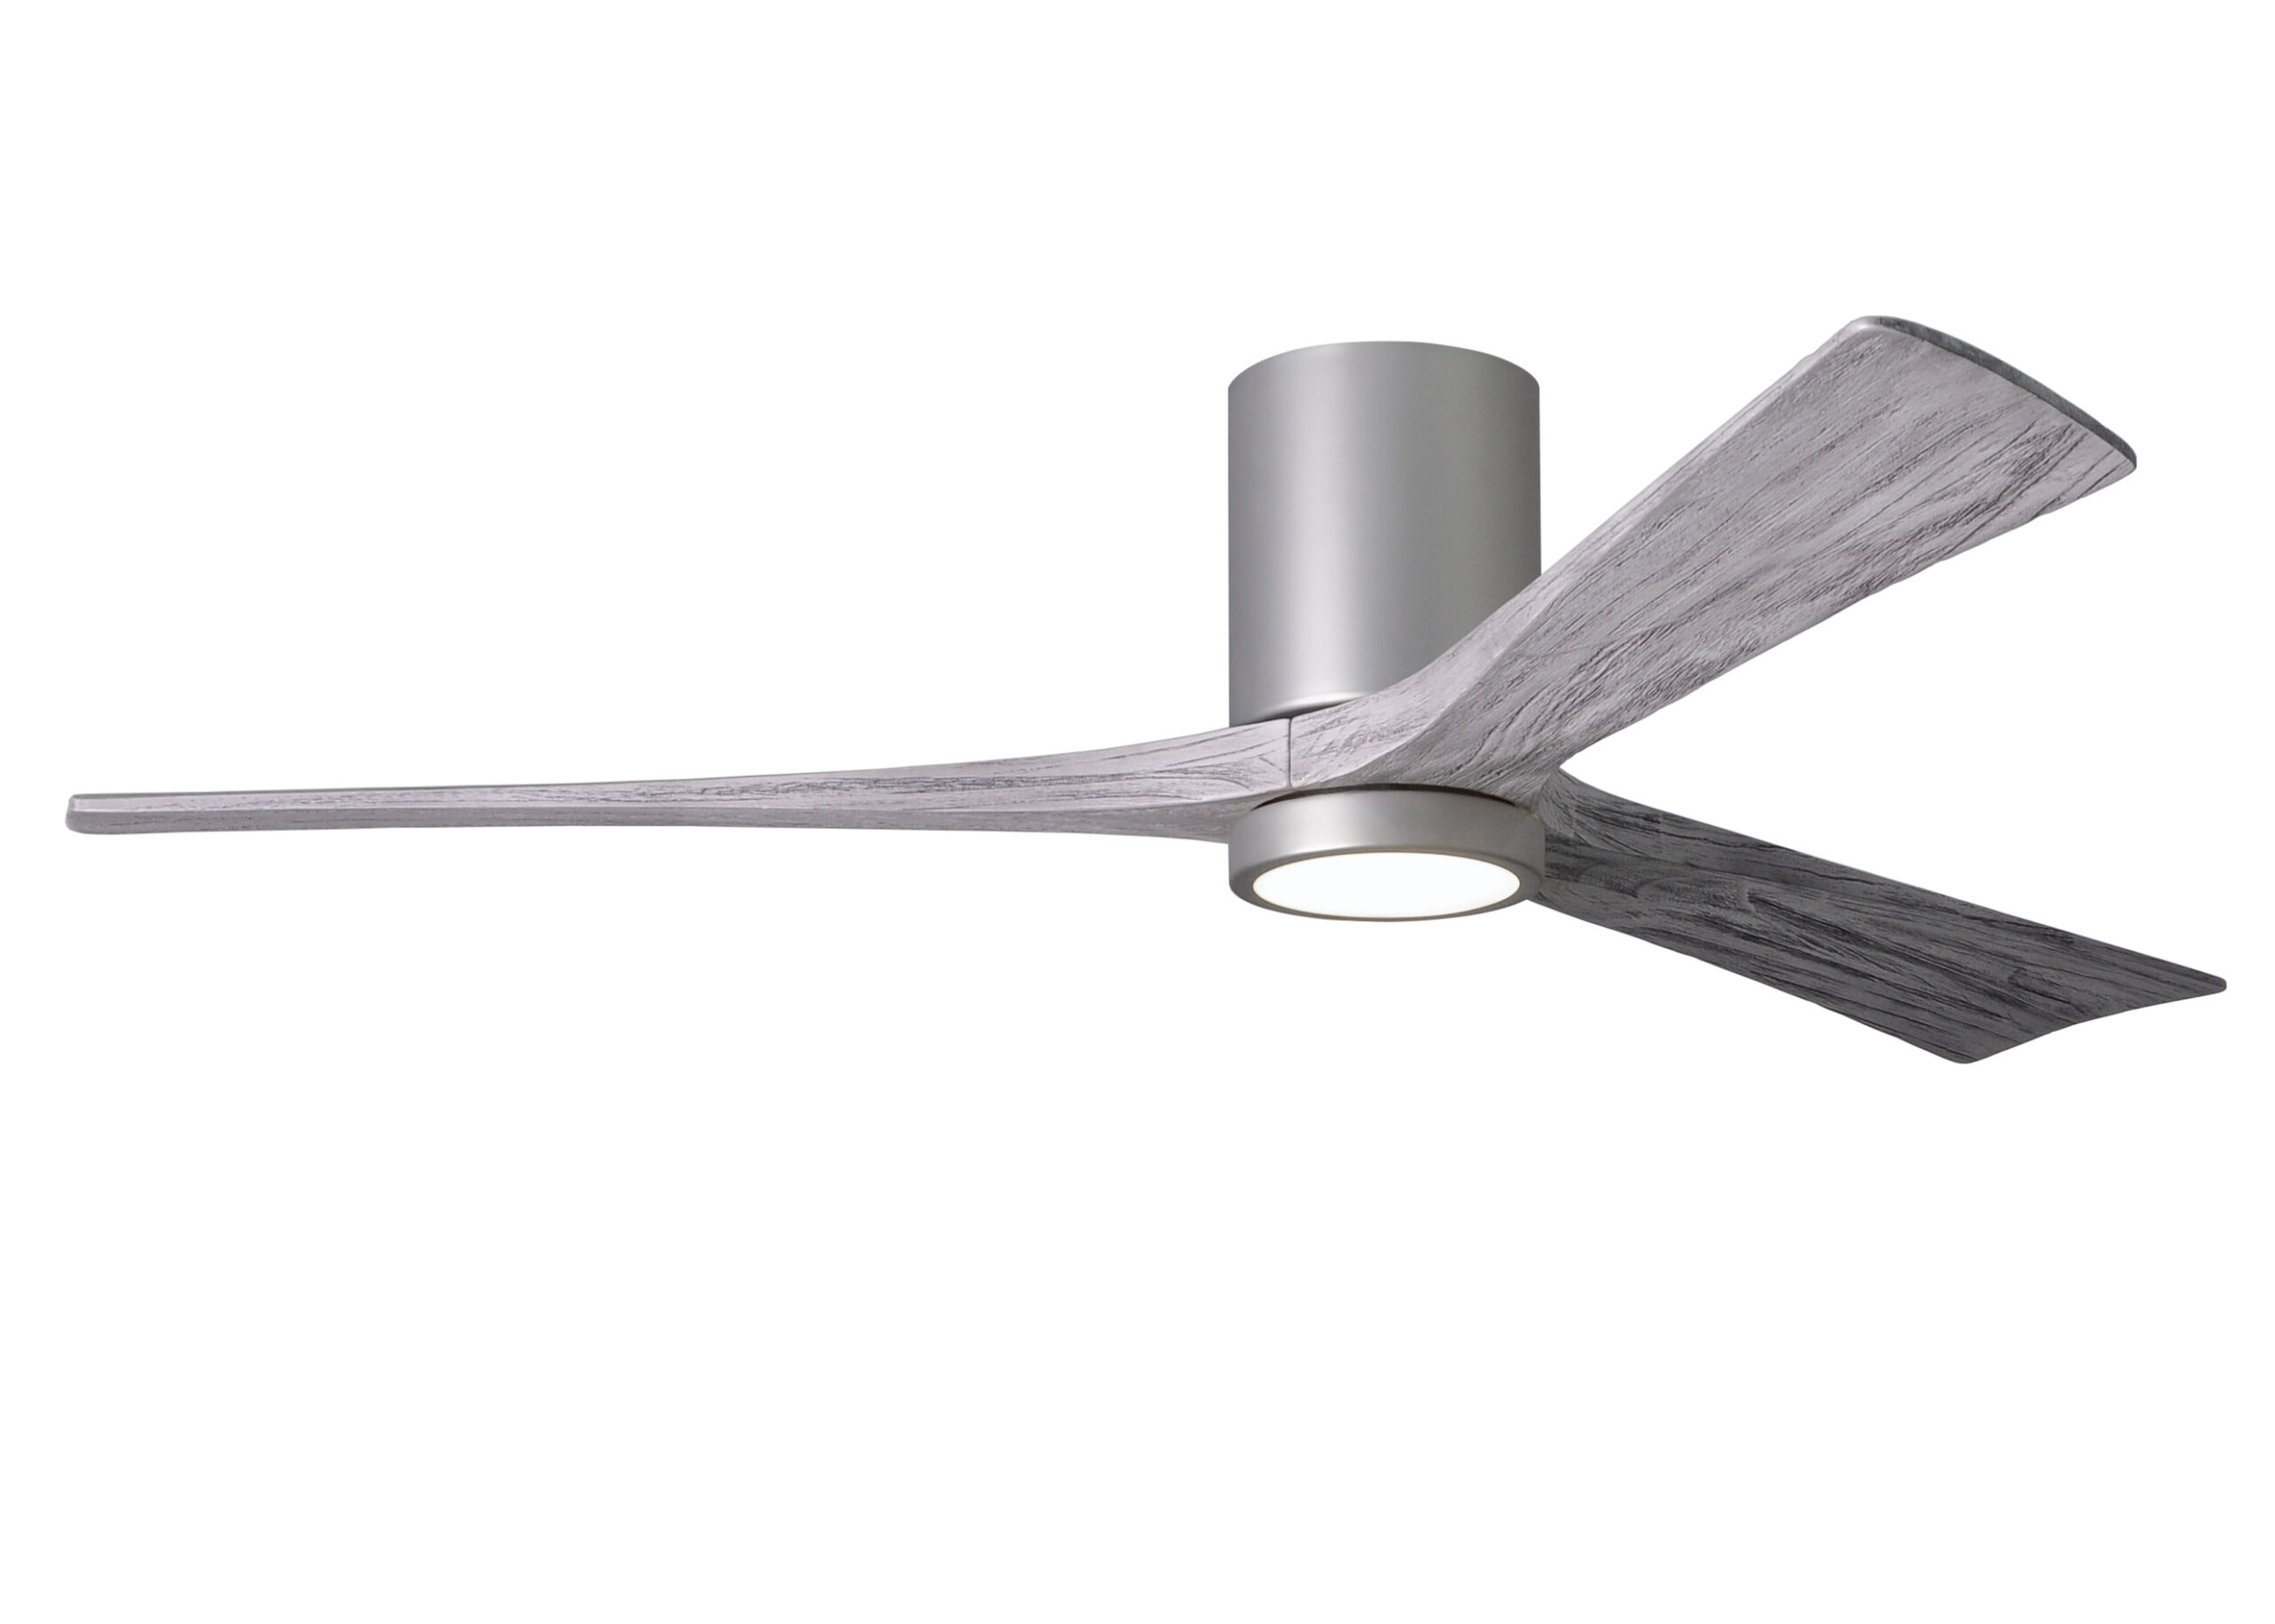 Irene-3HLK Ceiling Fan in Brushed Nickel Finish with 60